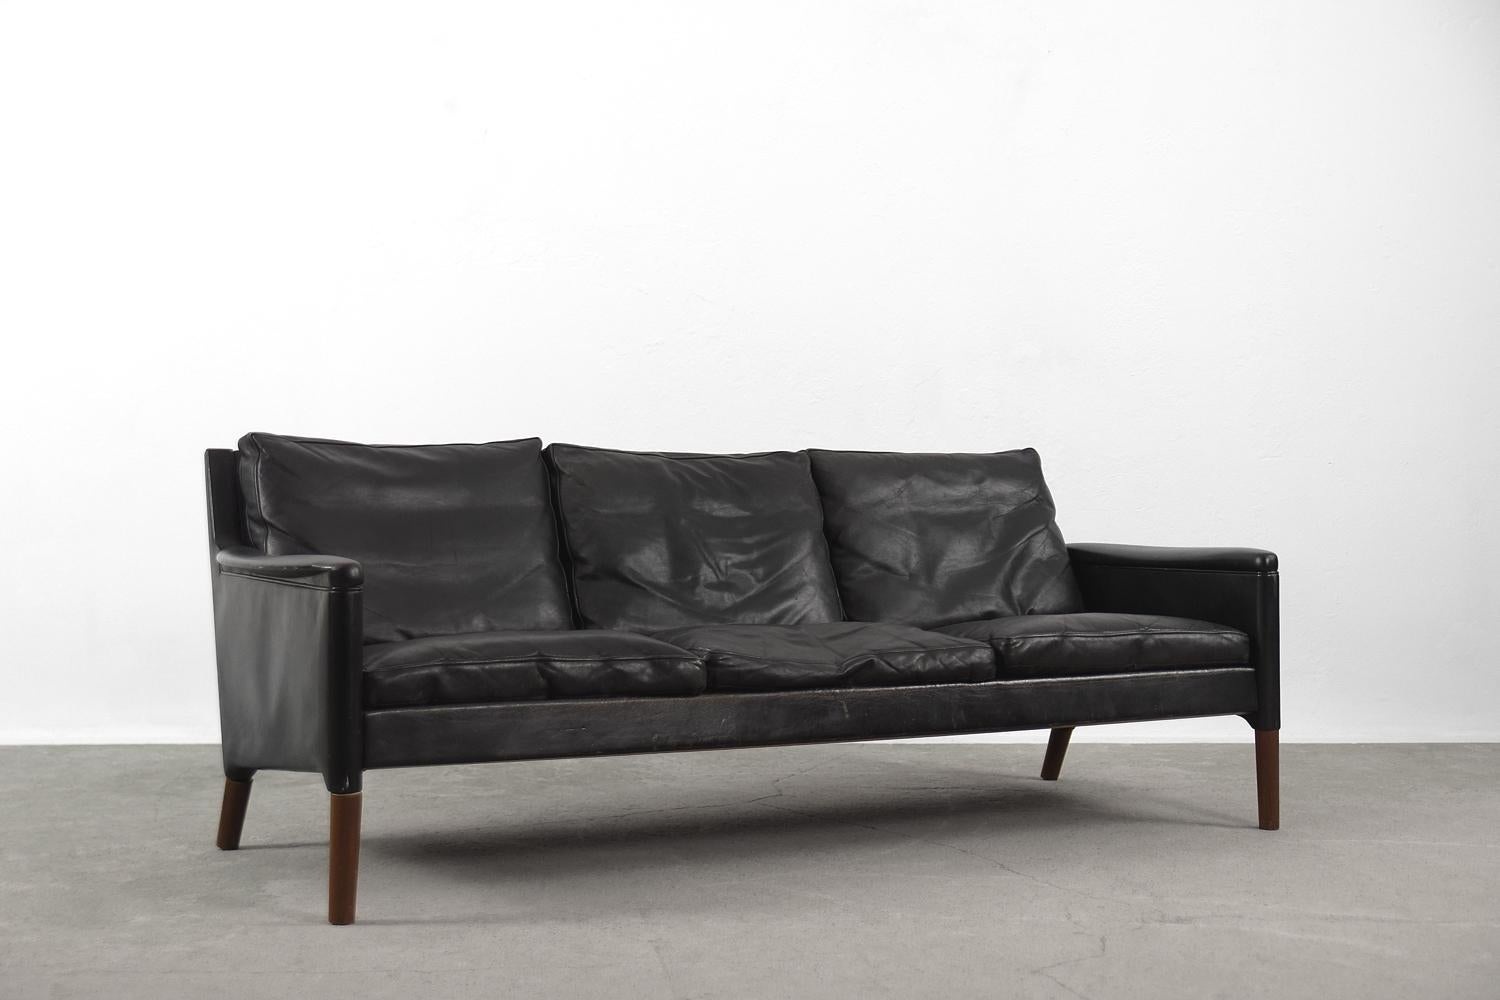 This leather three-seater sofa was designed by Kurt Østervig for the Danish manufacturer Centrum Møbler during the 1950s. It is model 55 from early production time. The sofa is upholstered in black leather with a natural patina. The legs are made of